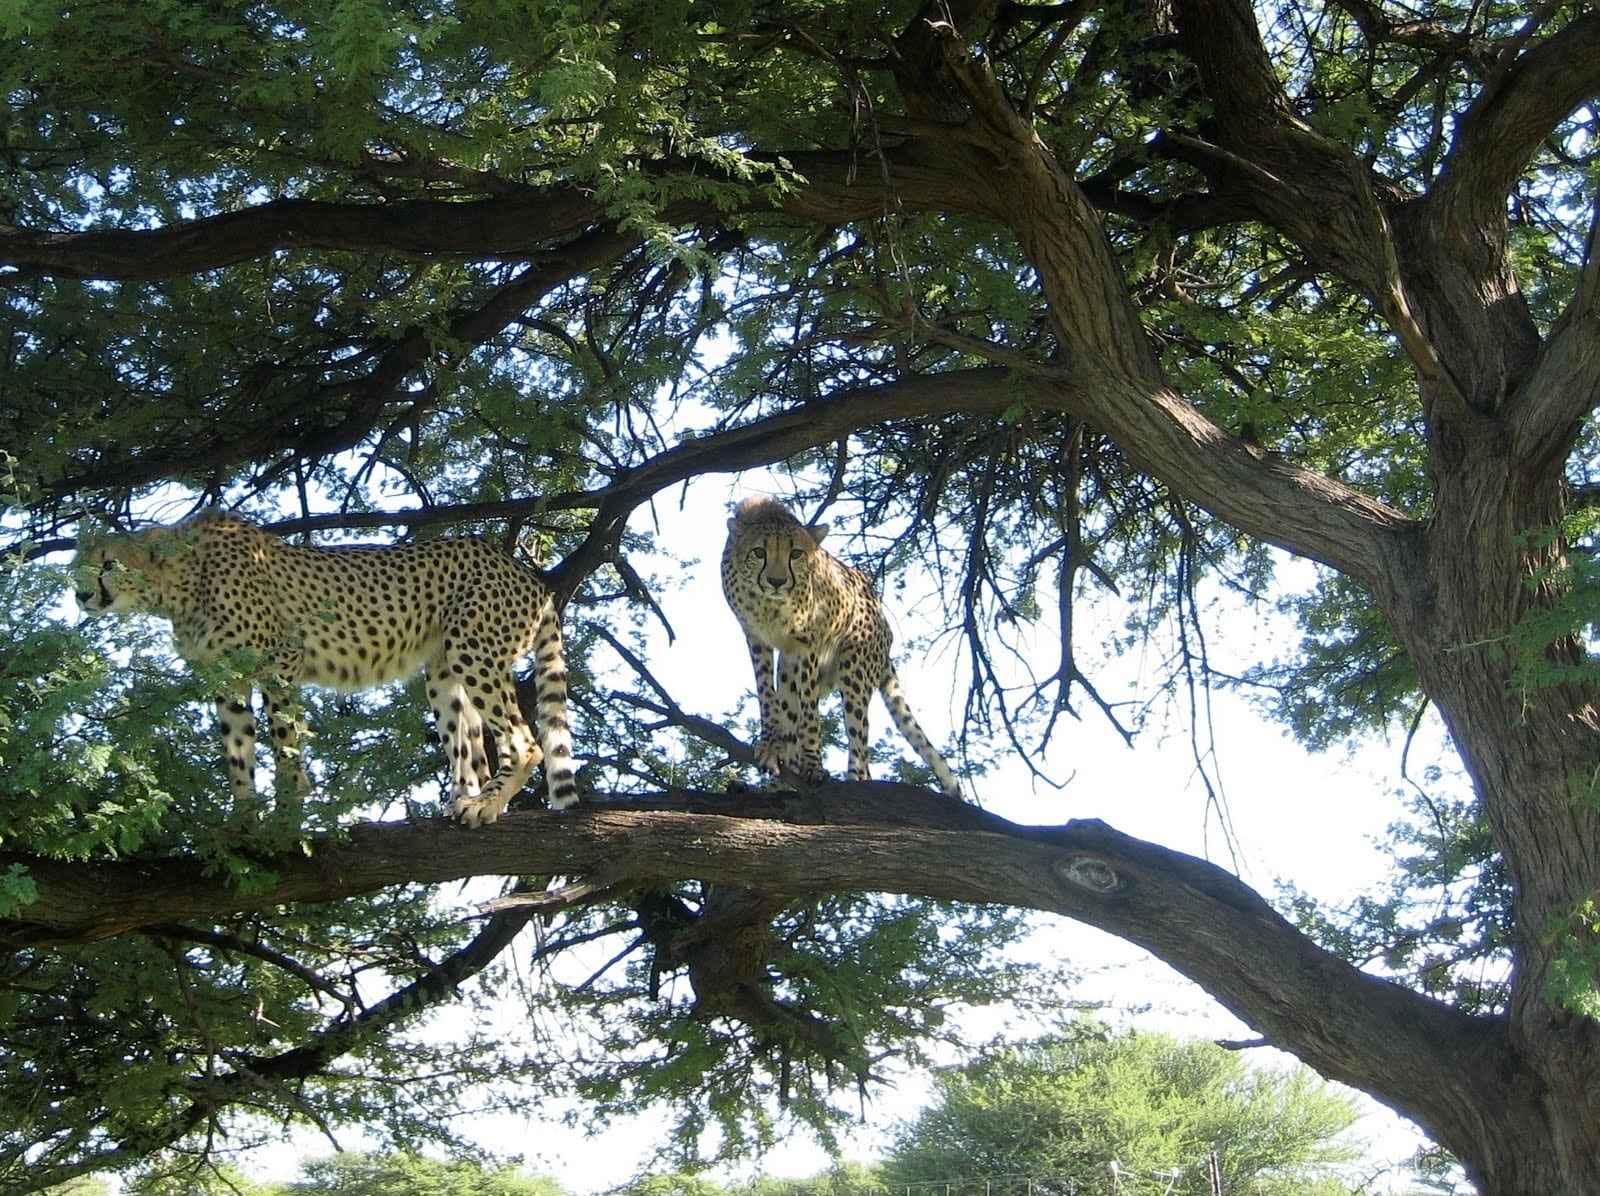 Two cheetahs spend time up in a play tree at the Cheetah Conservation Fund.